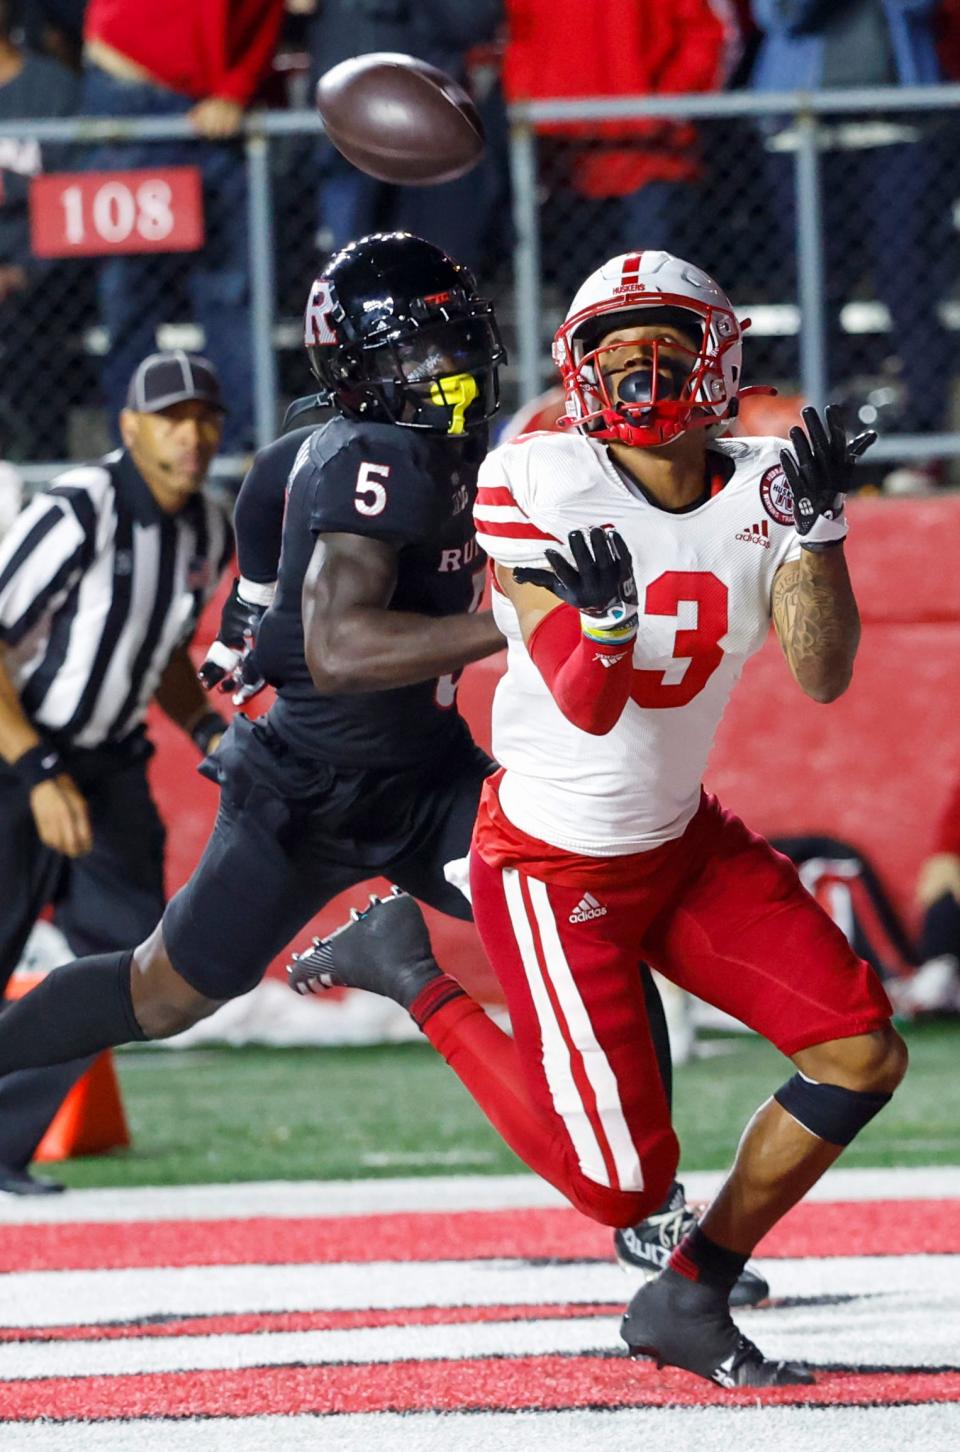 Rutgers defensive back Kessawn Abraham, left, watches Nebraska wide receiver Trey Palmer (3) catch a pass for a touchdown during the fourth quarter of an NCAA college football game Friday, Oct. 7, 2022, in Piscataway, N.J. (Andrew Mills/NJ Advance Media via AP)